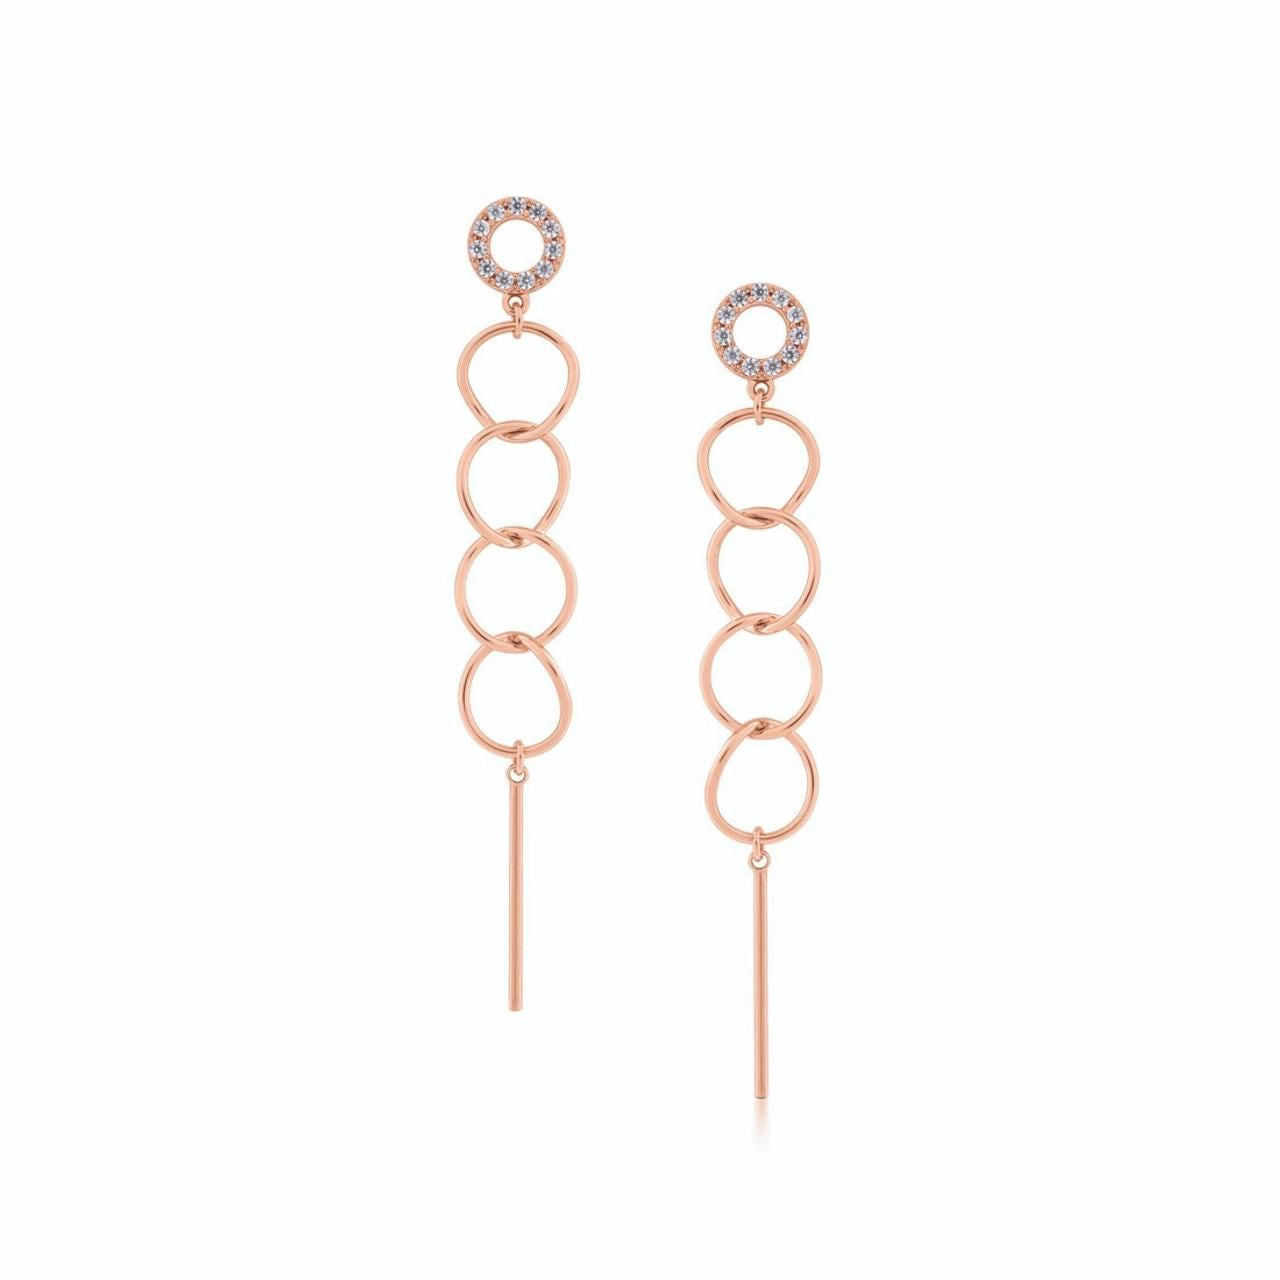 Romi Dublin Rose Gold Circle & Bar Drop Earrings  Inspired by the circle of life, the continuous circle of growth and regrowth, this collection was created to inspire you to live your life to its fullest.